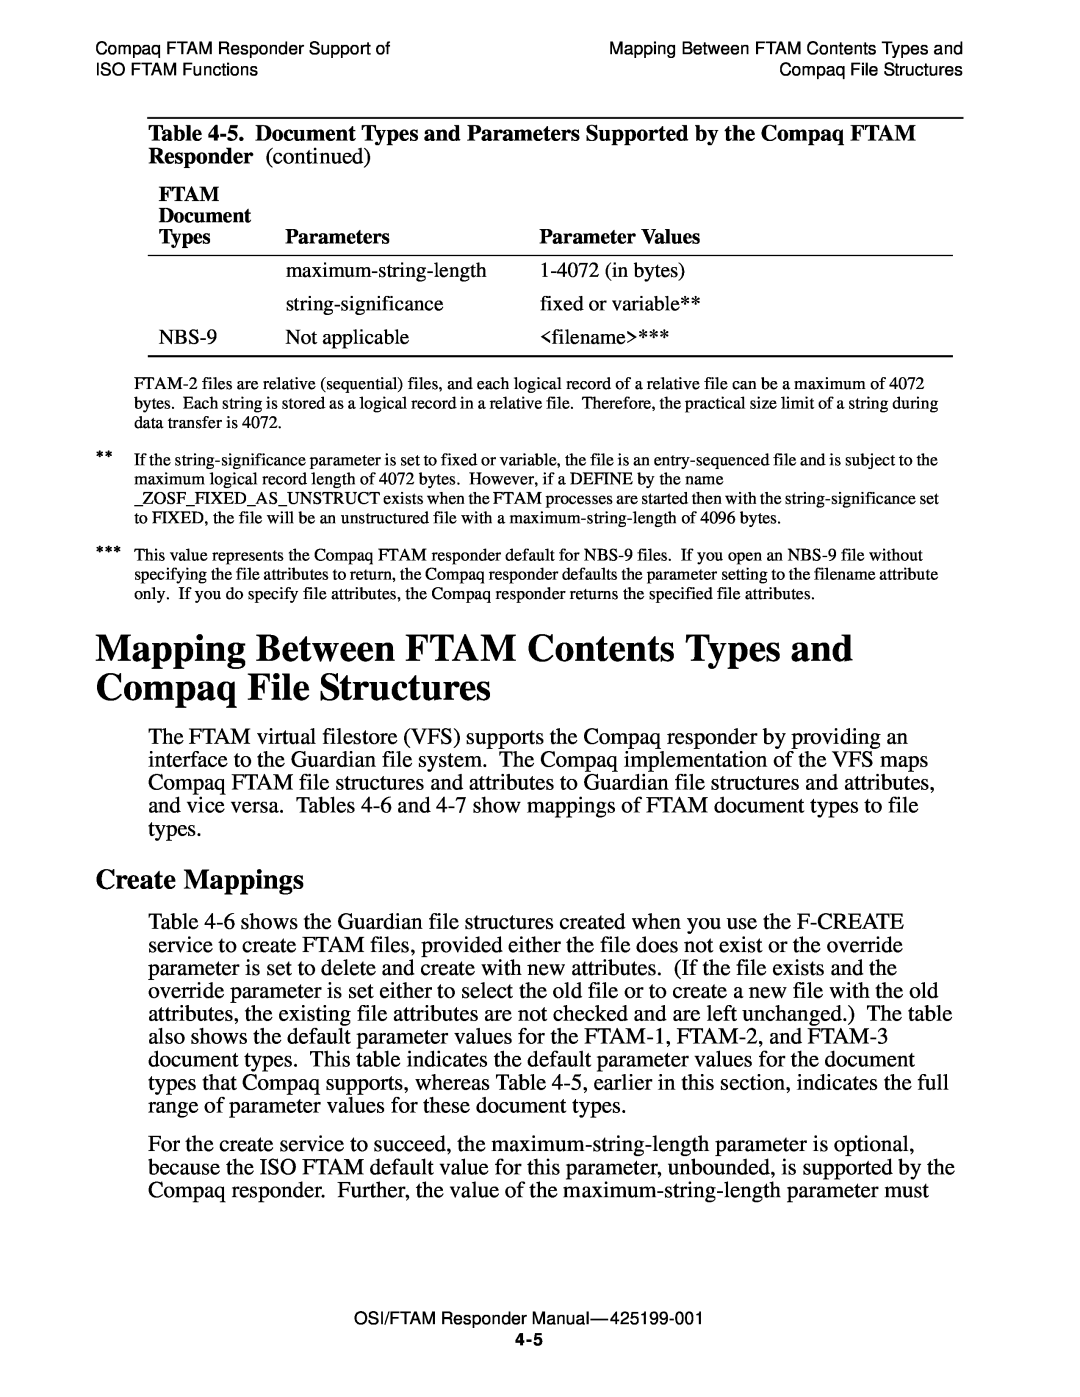 Compaq OSI/FTAM D43, OSI/APLMGR D43 manual Mapping Between FTAM Contents Types and Compaq File Structures, Create Mappings 